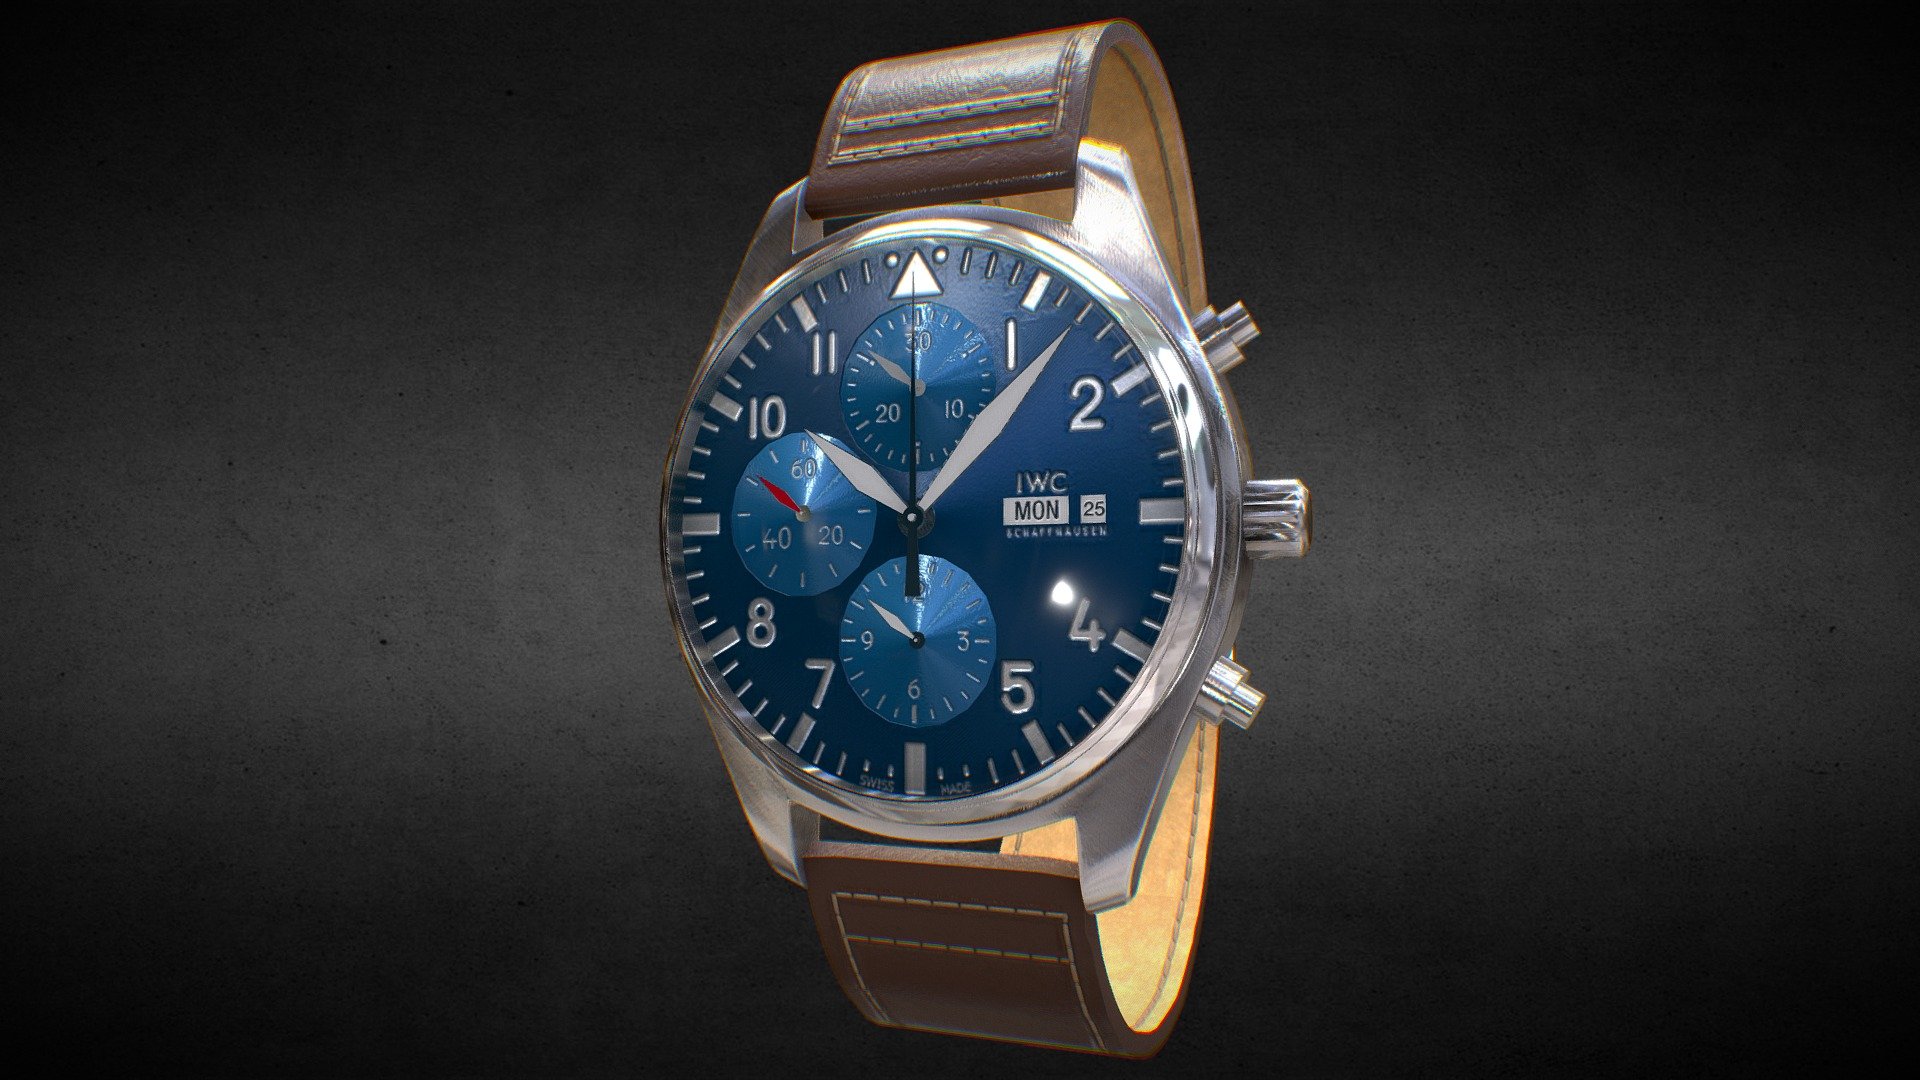 Awesome stainless steel IWC Pilots Le Petit Prince Man's  watch with leather strap.
Use for Unreal Engine 4 and Unity3D. Try in augmented reality in the AR-Watches app. 
Links to the app: Android, iOS

Currently available for download in dae format.

3D model developed by AR-Watches

Disclaimer: We do not own the design of the watch, we only made the 3D model 3d model